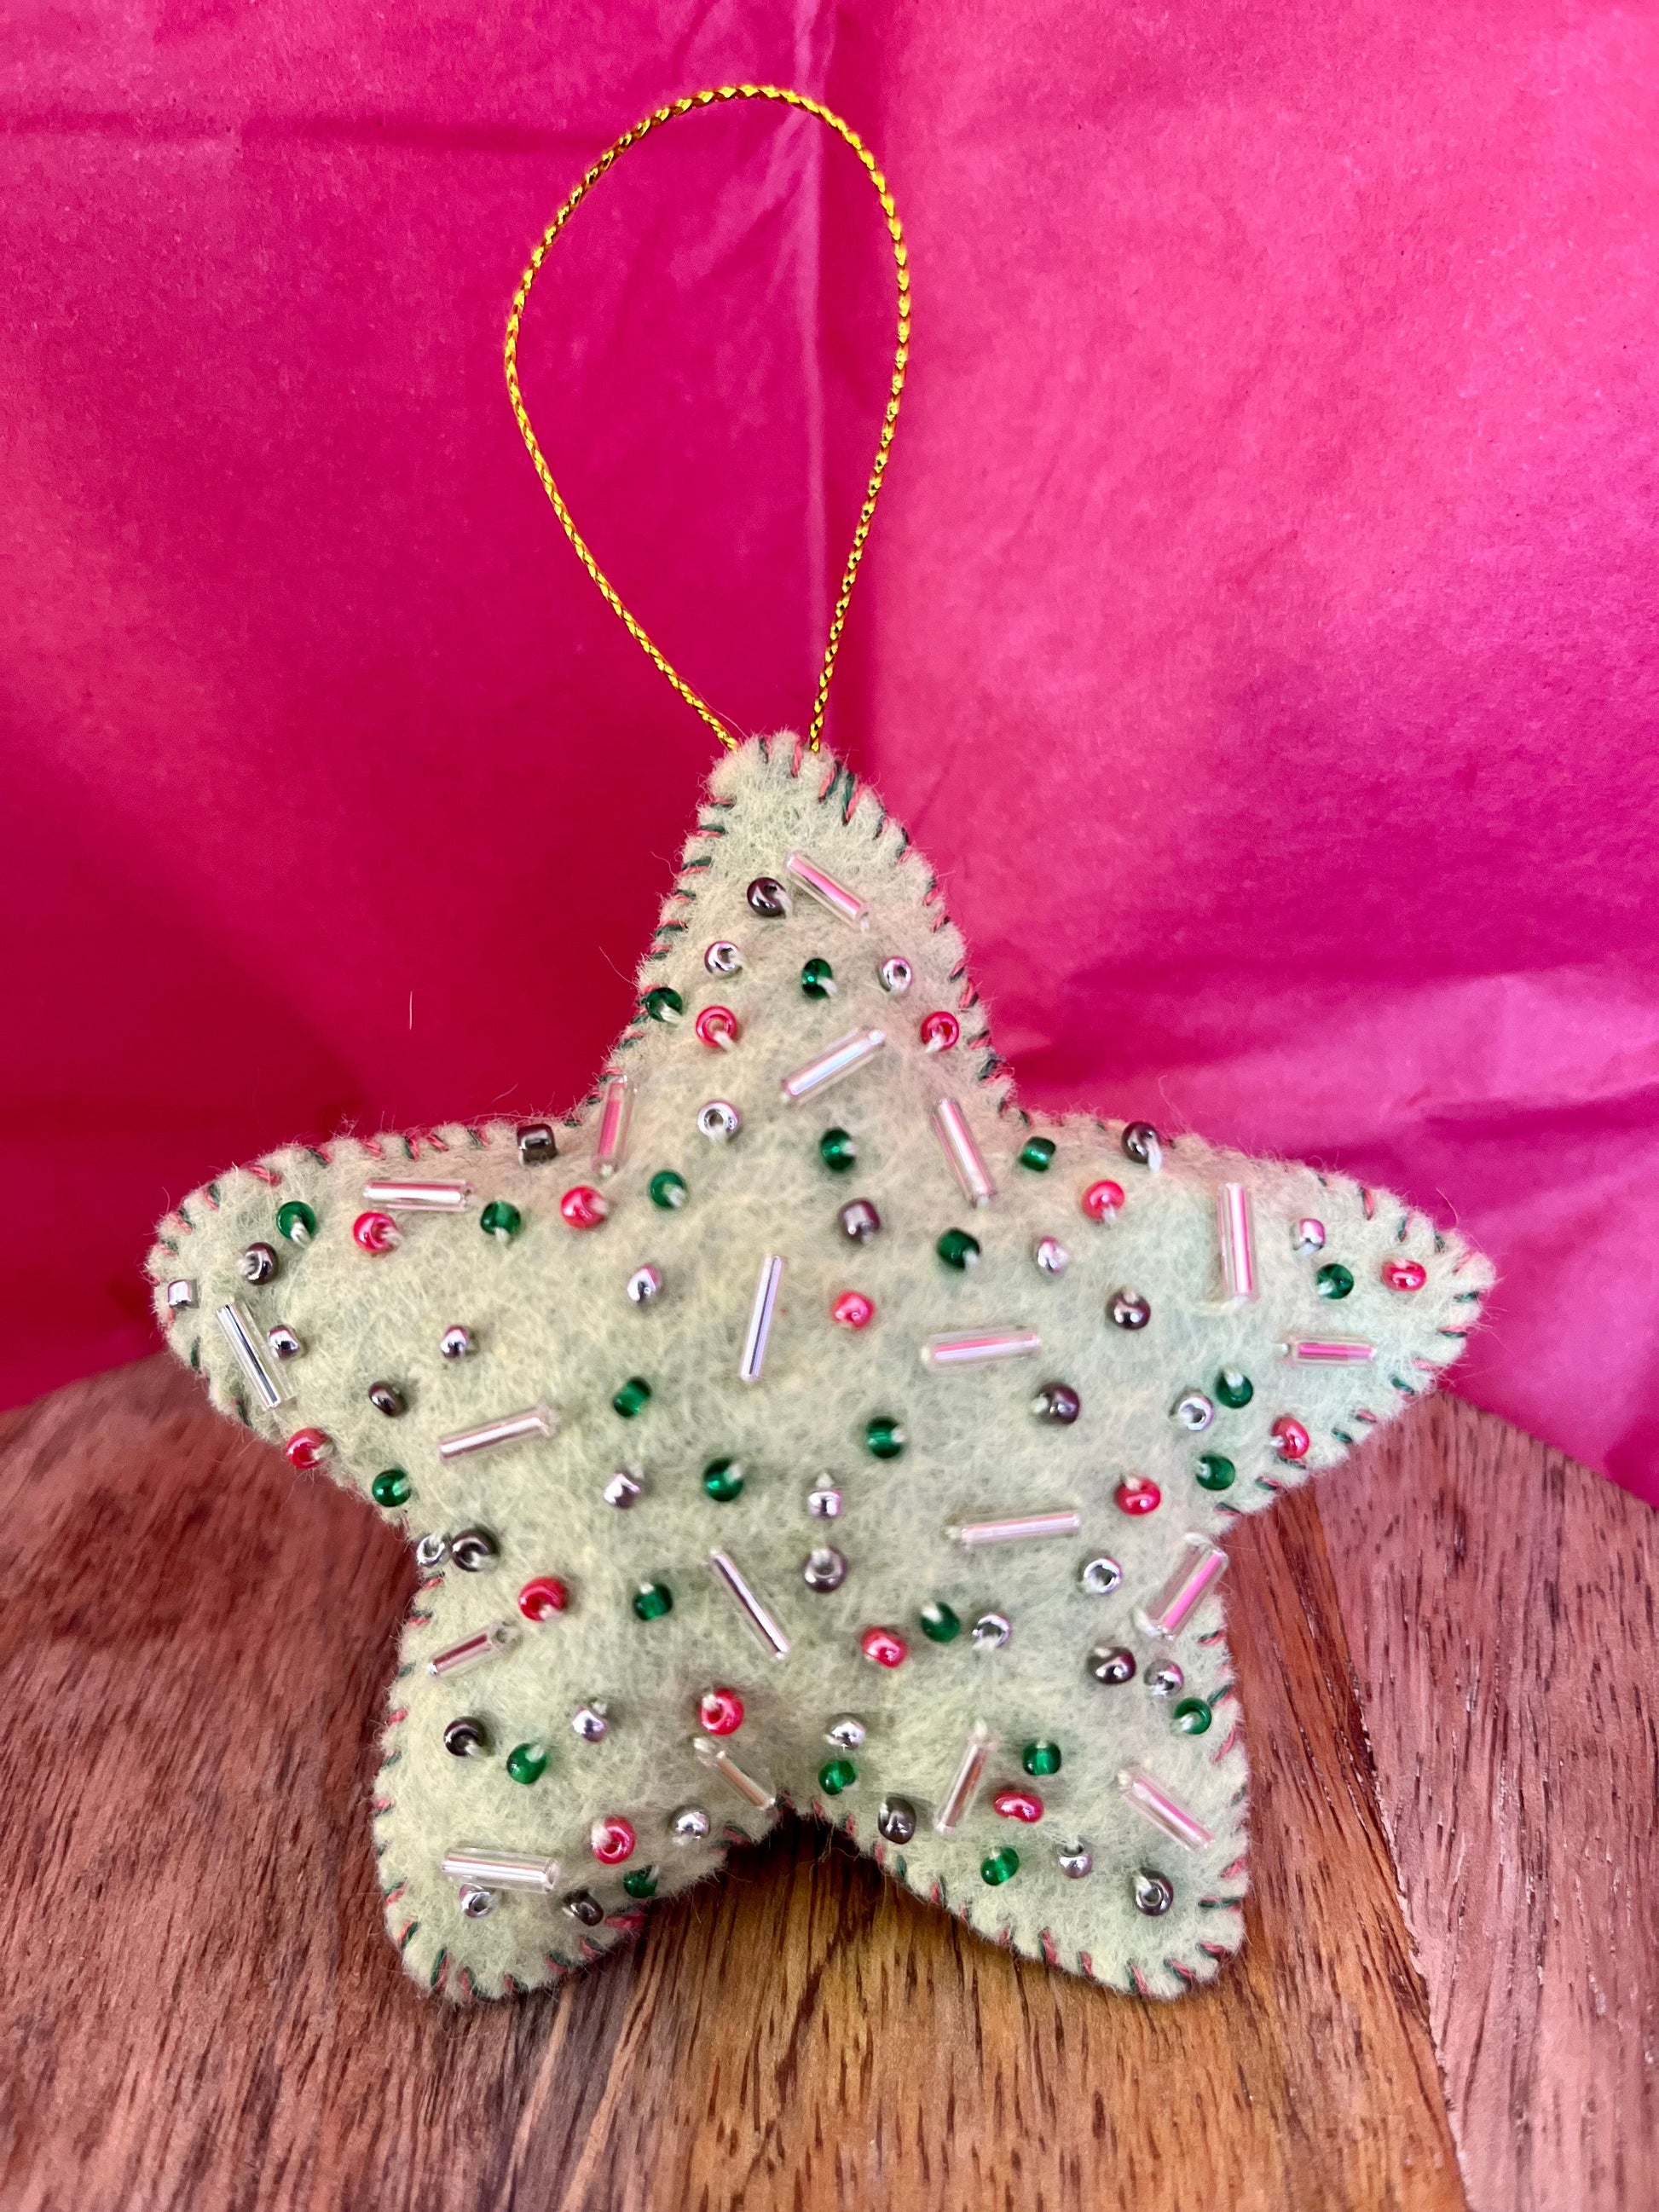 Embroidered Stars & Moon Ornaments ornaments from GemCadet